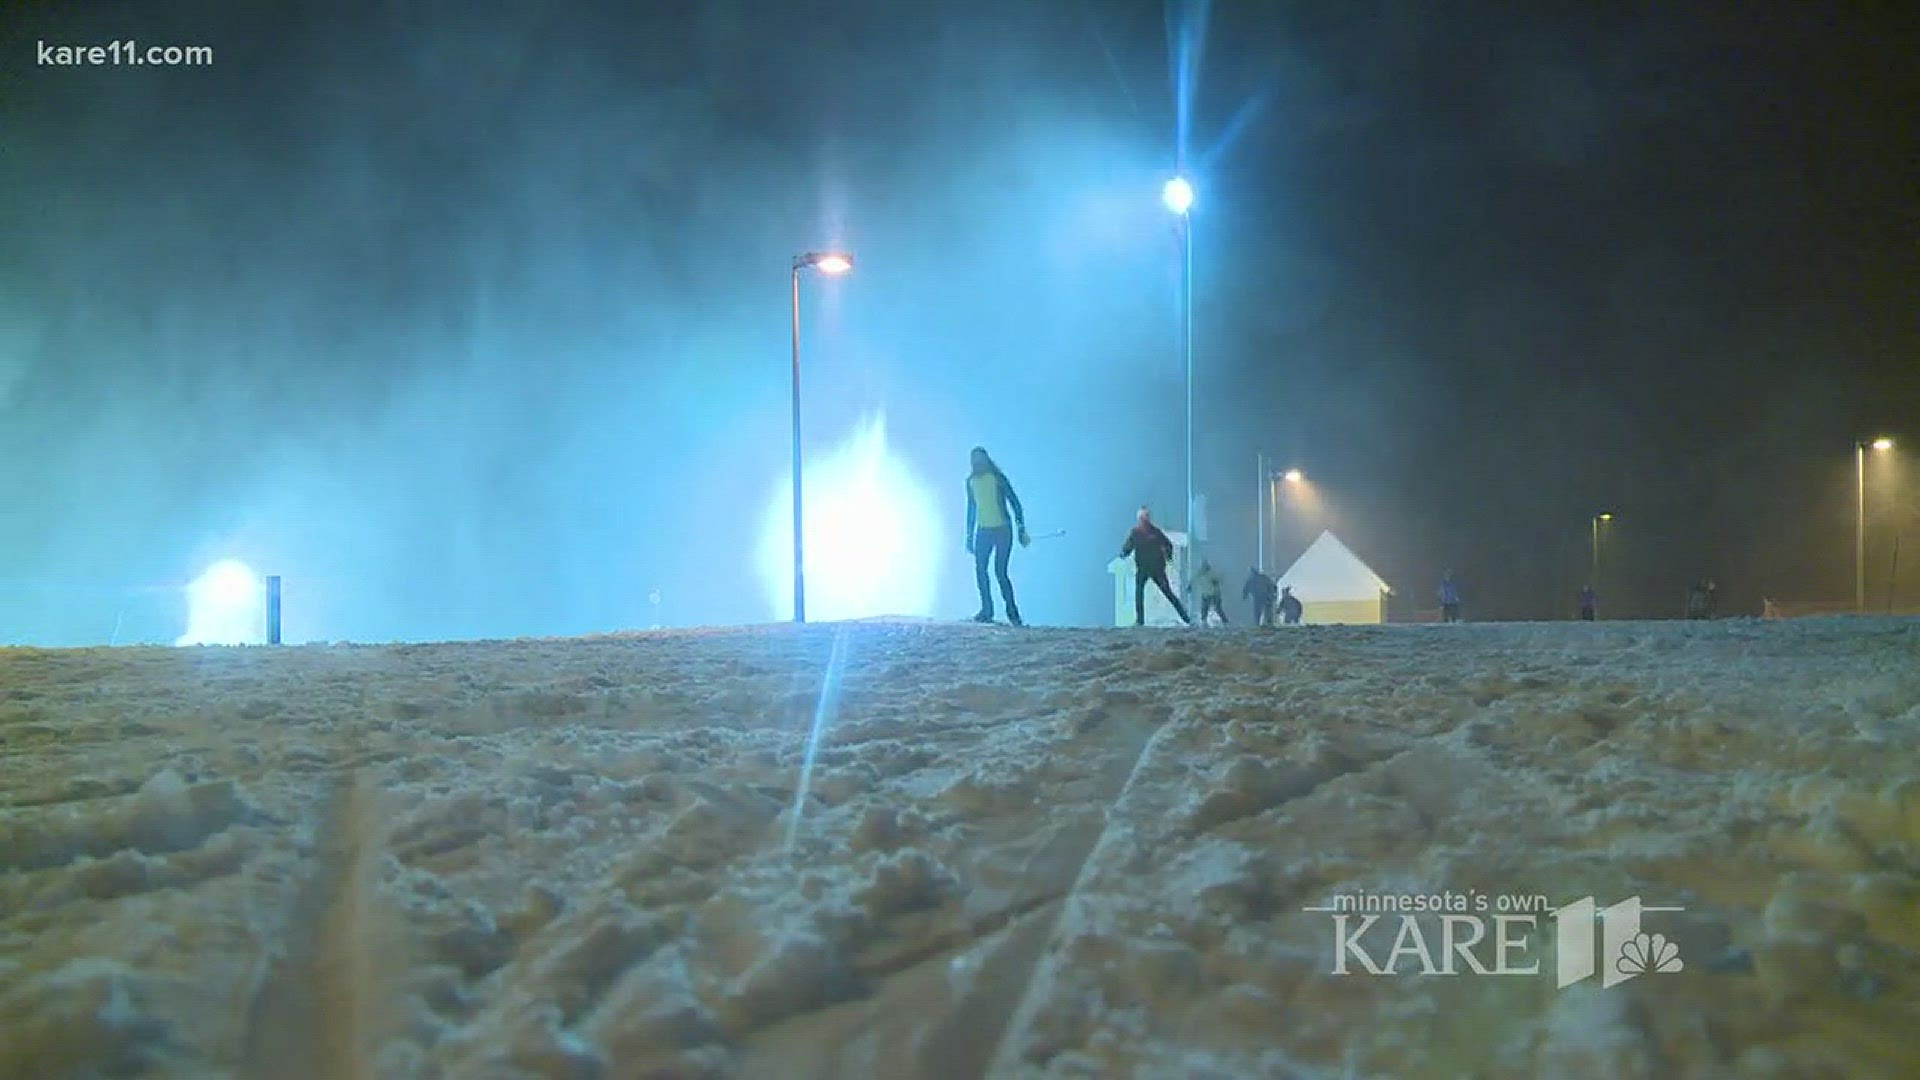 Recently, the co-op between Chaska and Chanhassen has seen a 30 percent increase in participation in their Nordic skiing program -- and they're looking to make a name for themselves this year. http://kare11.tv/2liFqLU